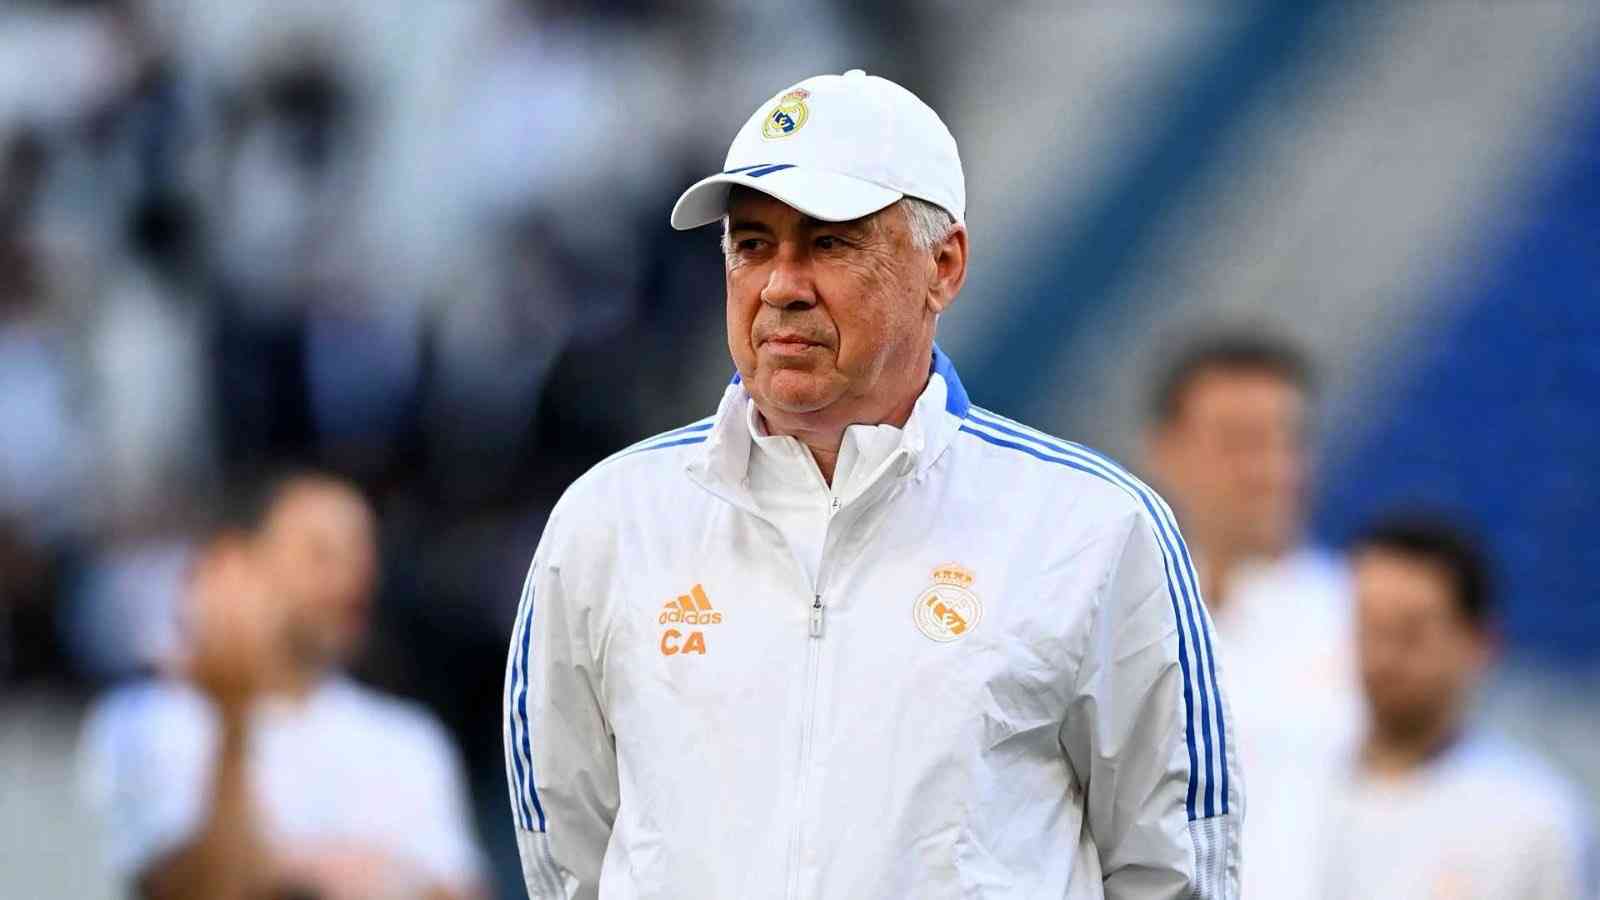 Real Madrid extends Ancelotti's contract until 2026 after Brazil's interest in hiring him as coach